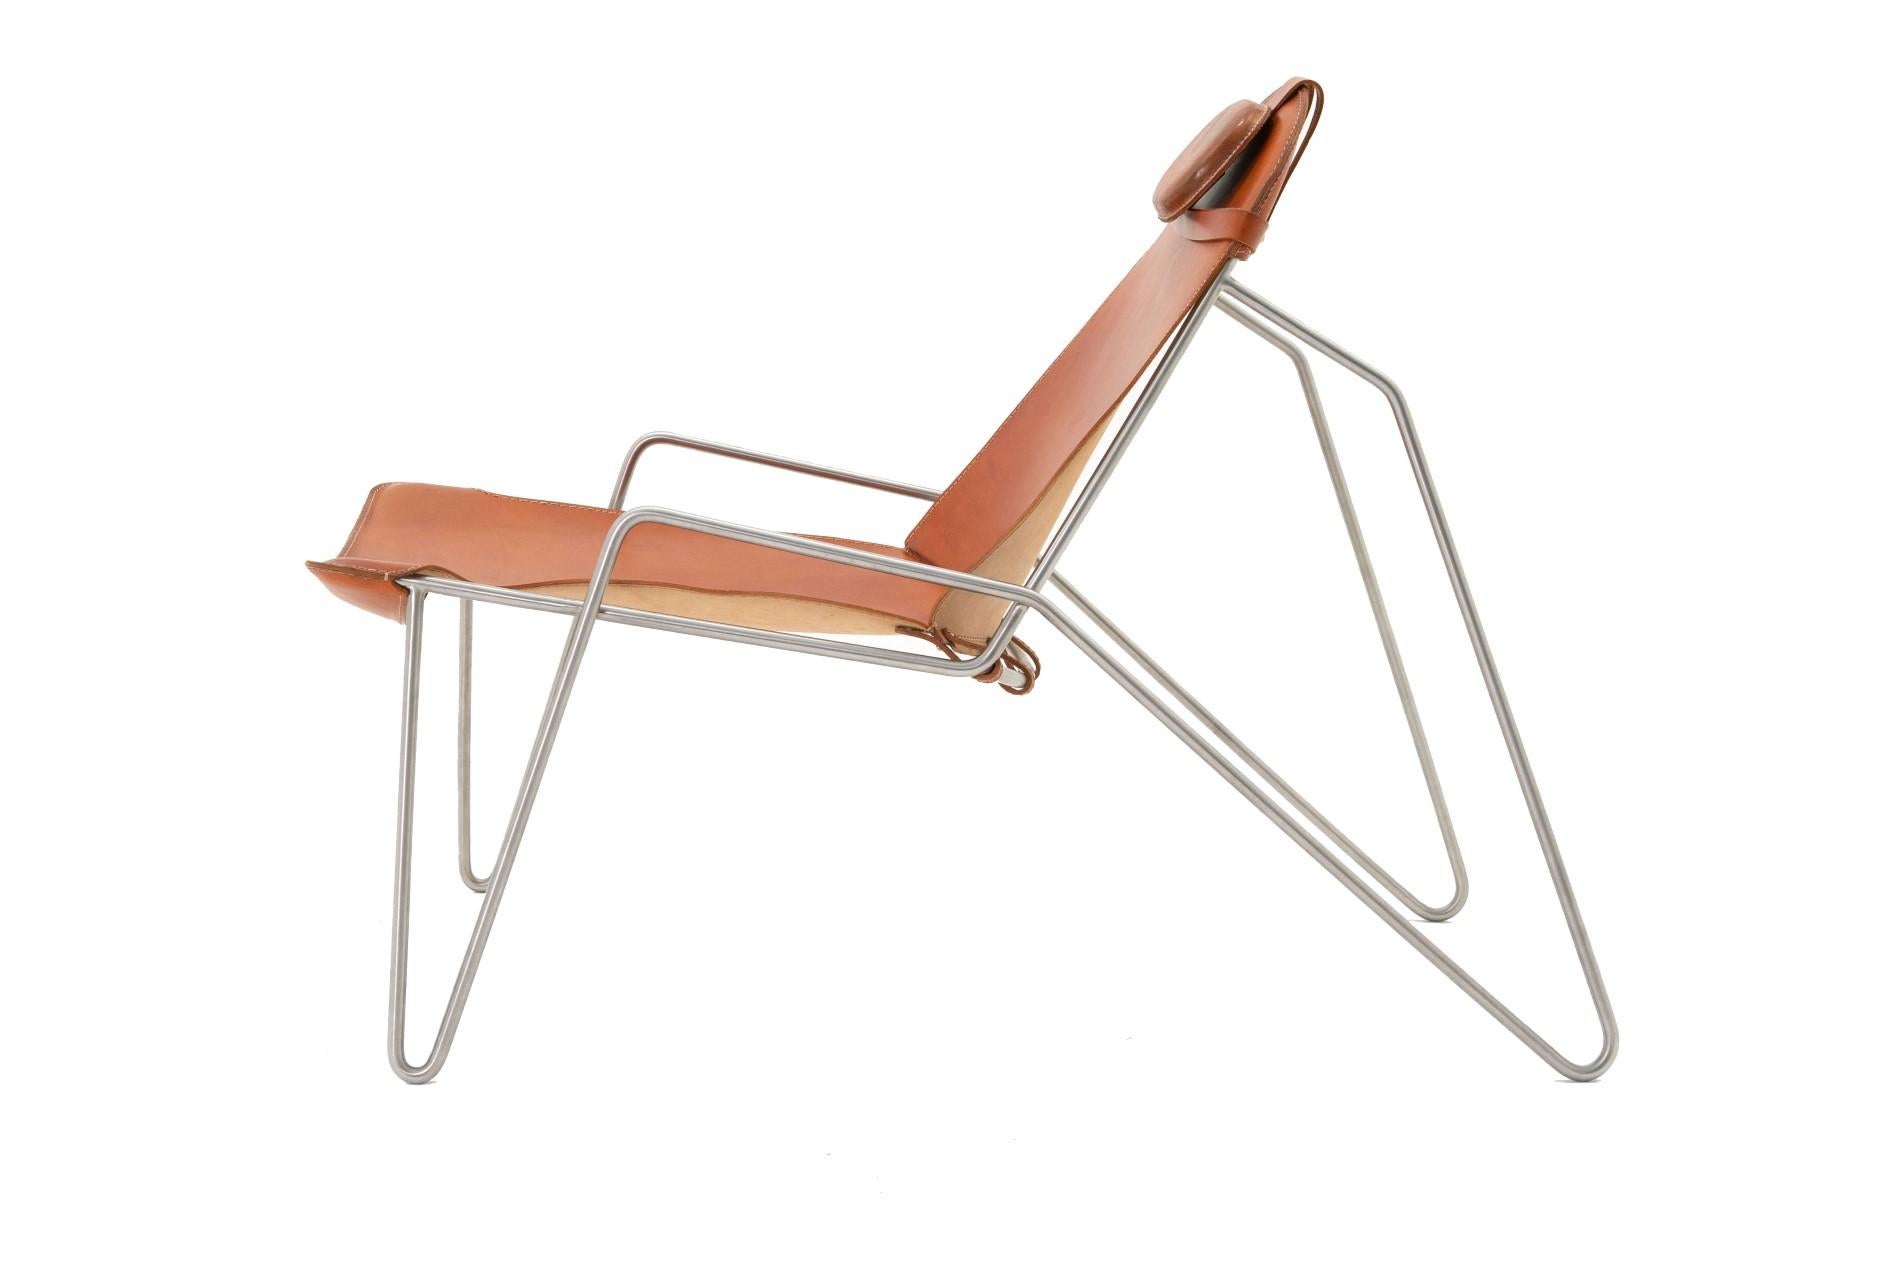 The easy chair features a handcrafted leather sling backrest and seat with adjustable belts on a solid stainless-steel frame. And a height-adjustable pillow that rests on a removable bikini trunk. The easy chair takes from the relaxed dropped curved